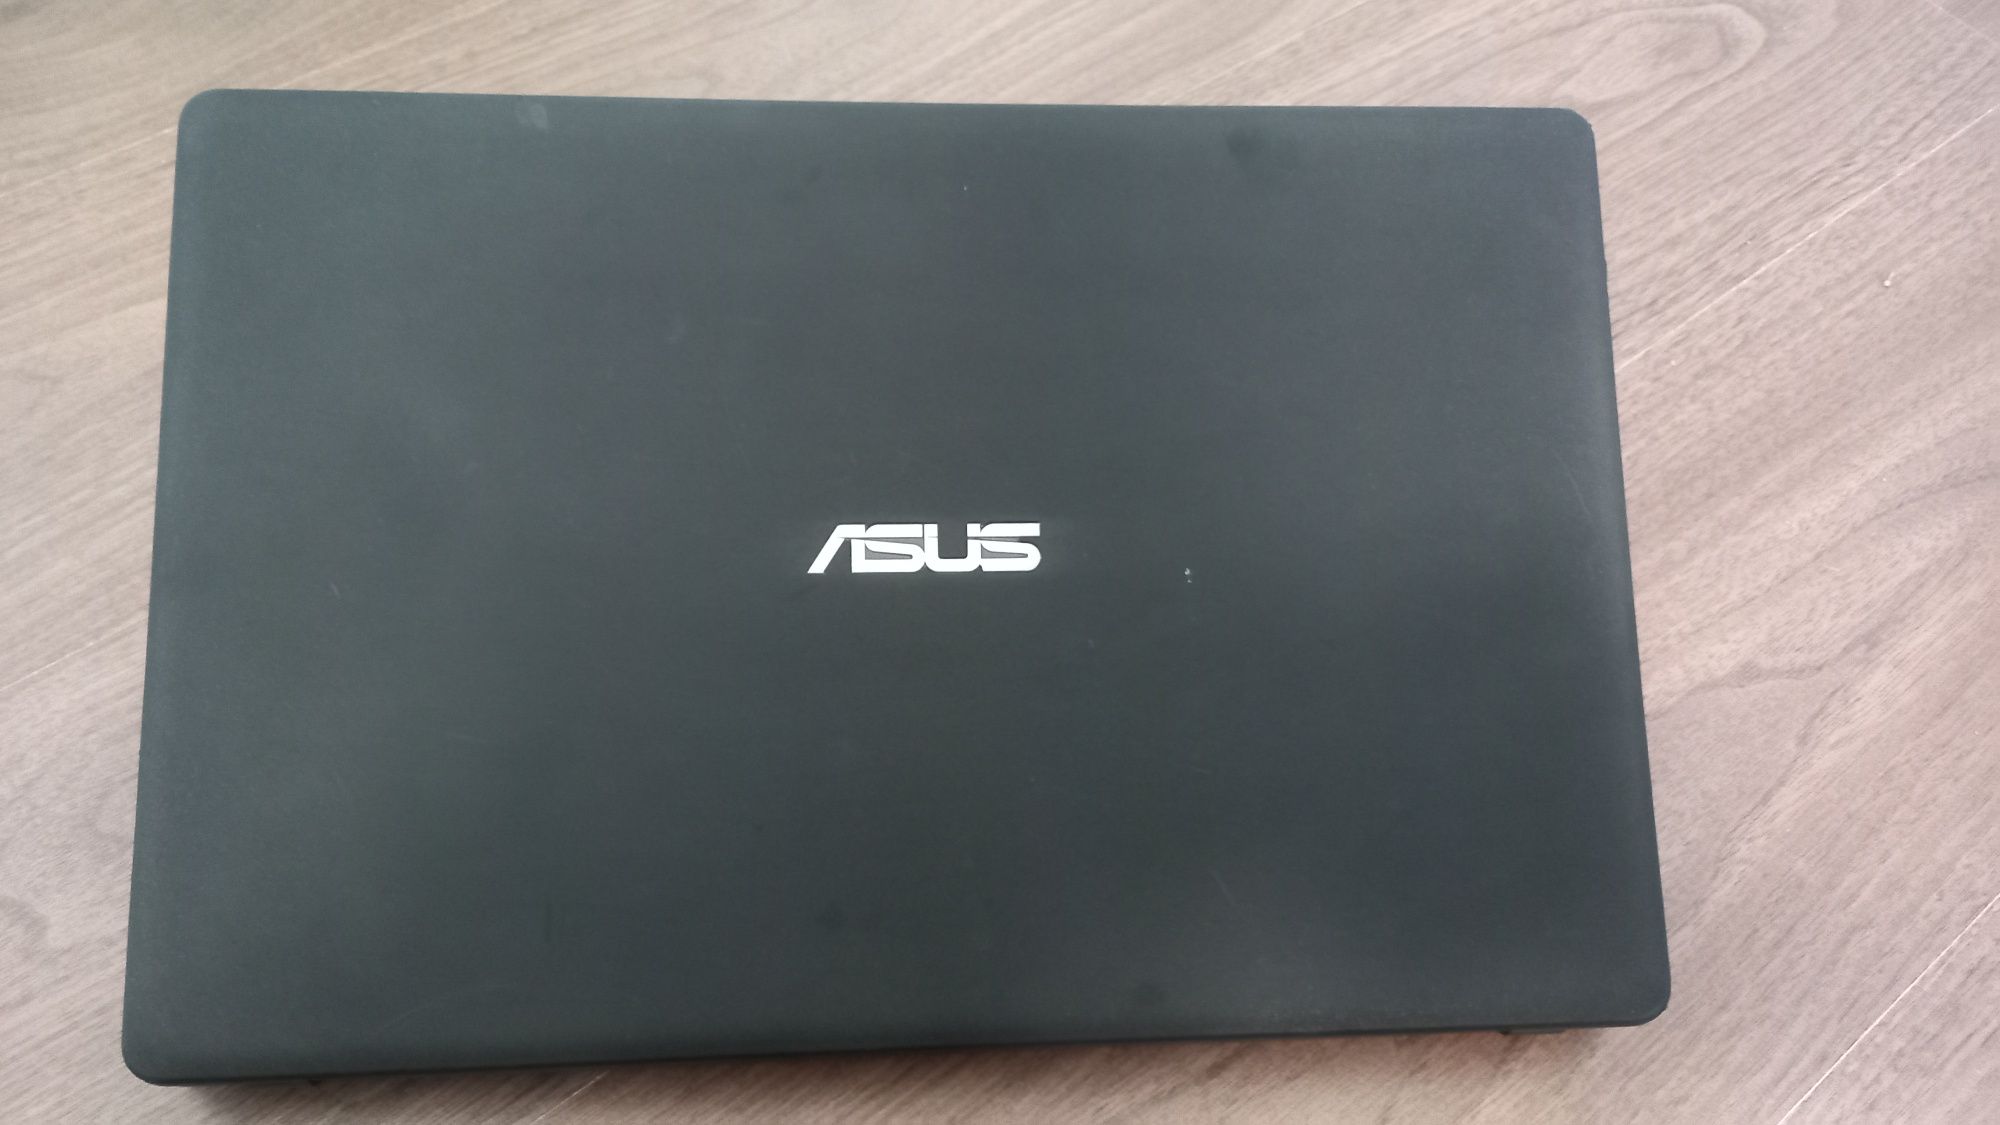 Asus X550c. Notebook. Core i5